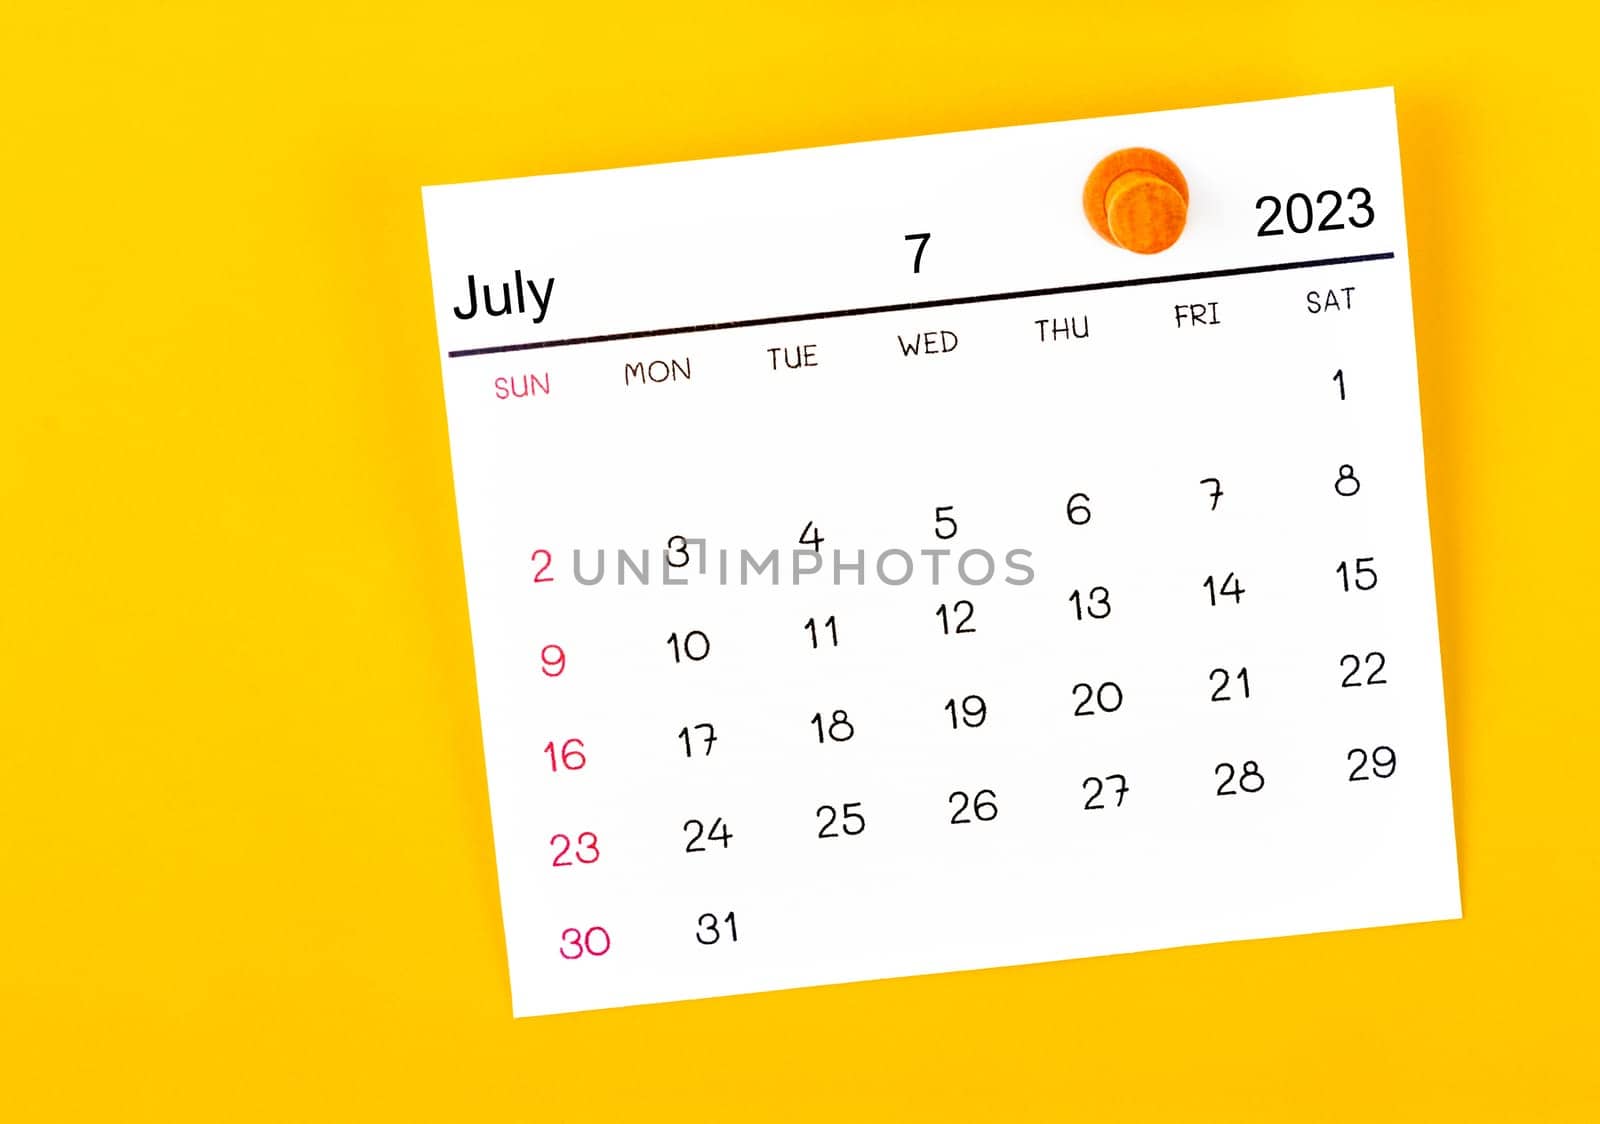 The July 2023 and wooden push pin on yellow background. by Gamjai